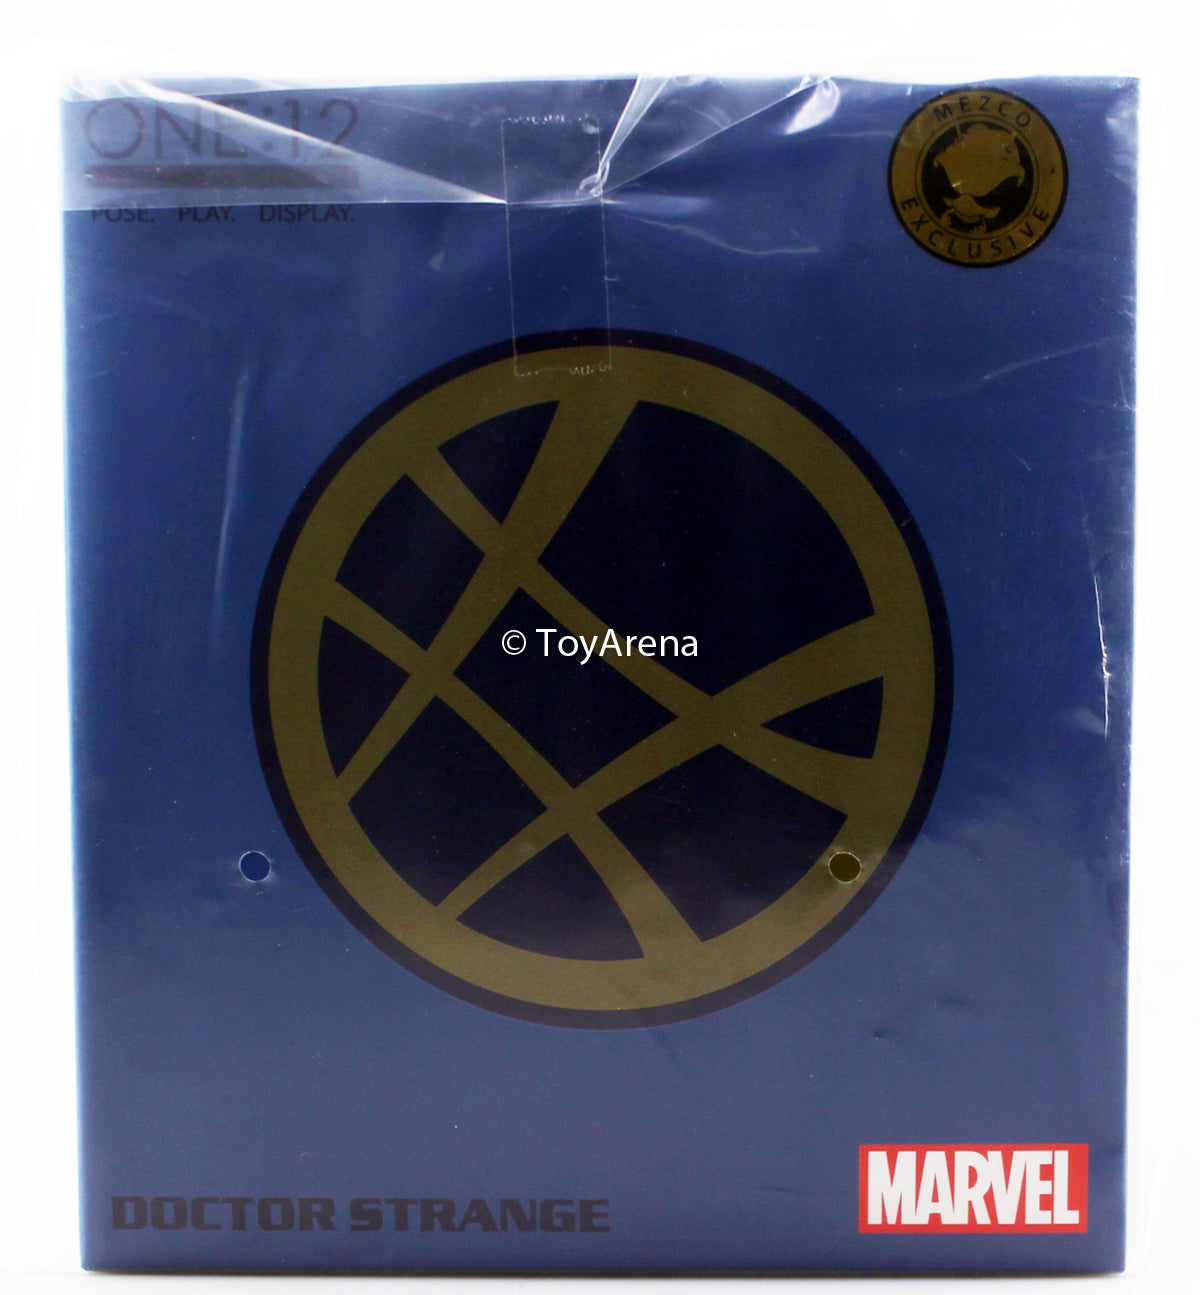 Mezco Toyz ONE:12 Collective: Dr. Strange First Appearance Edition Action Figure